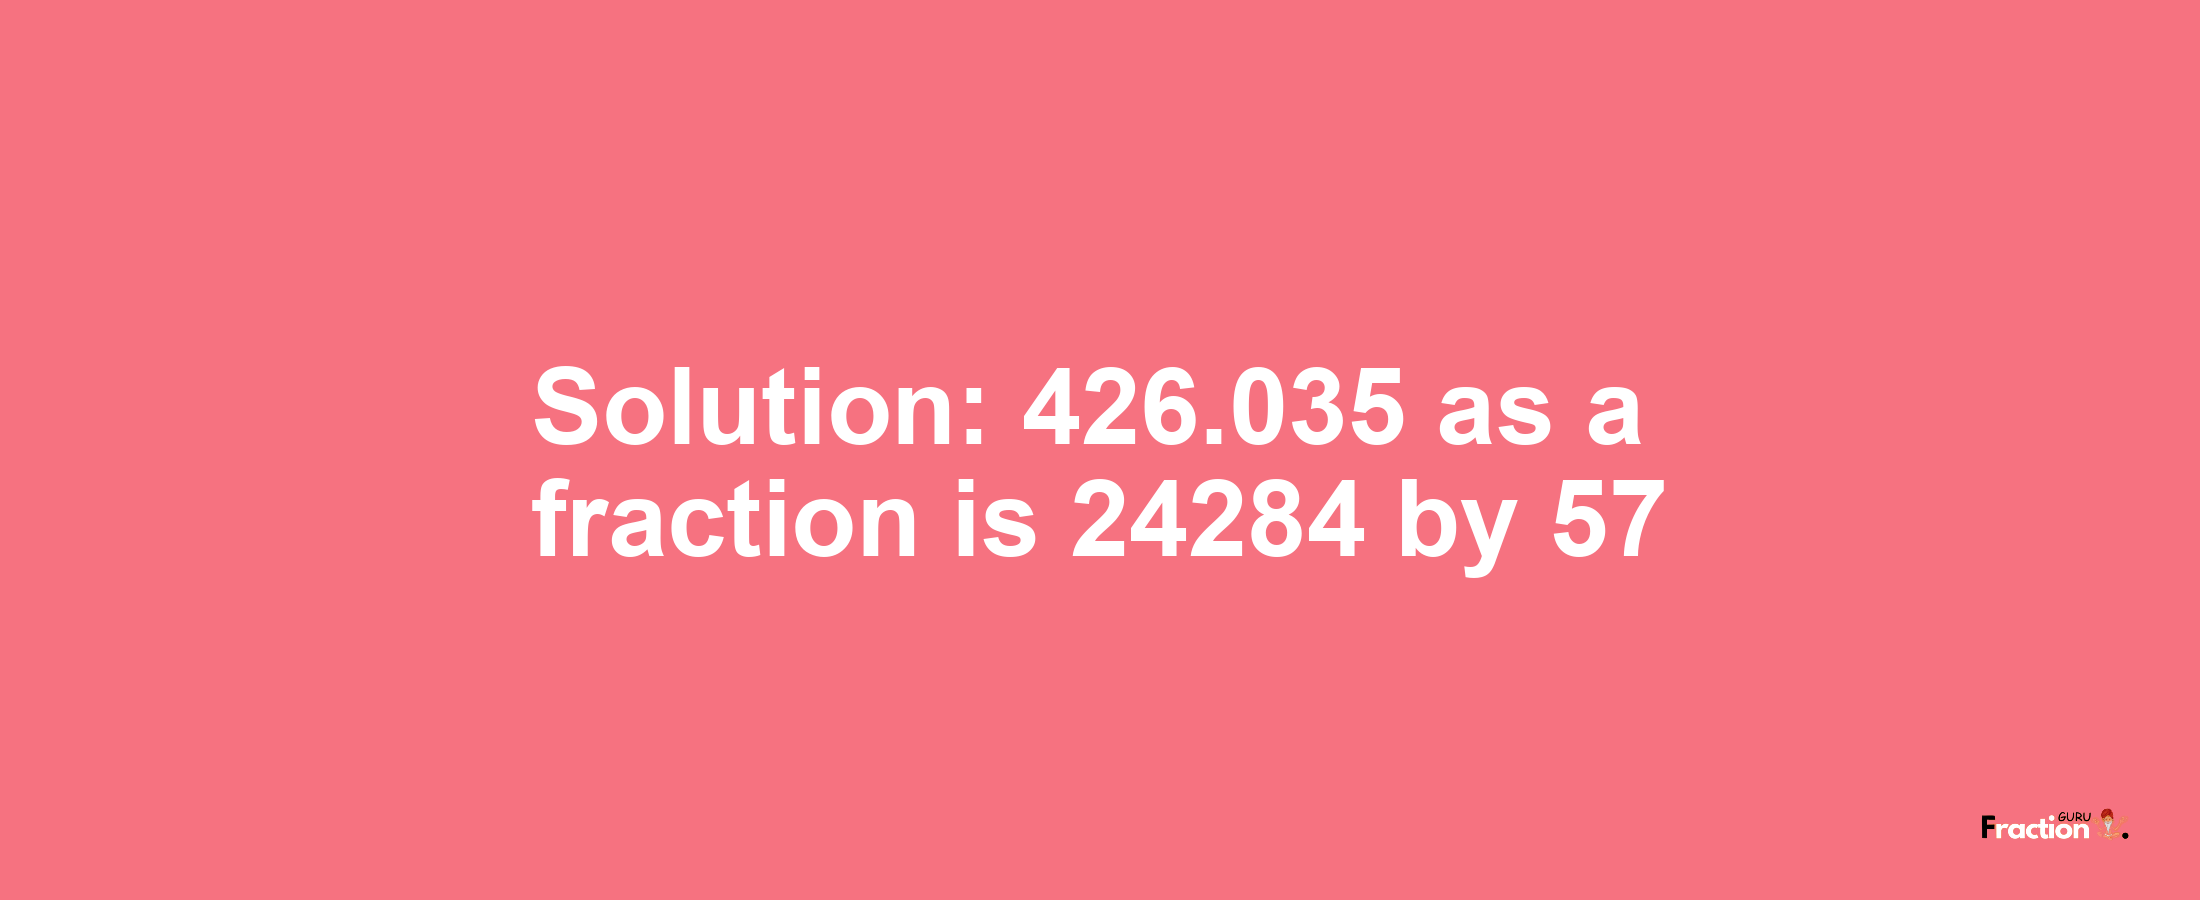 Solution:426.035 as a fraction is 24284/57